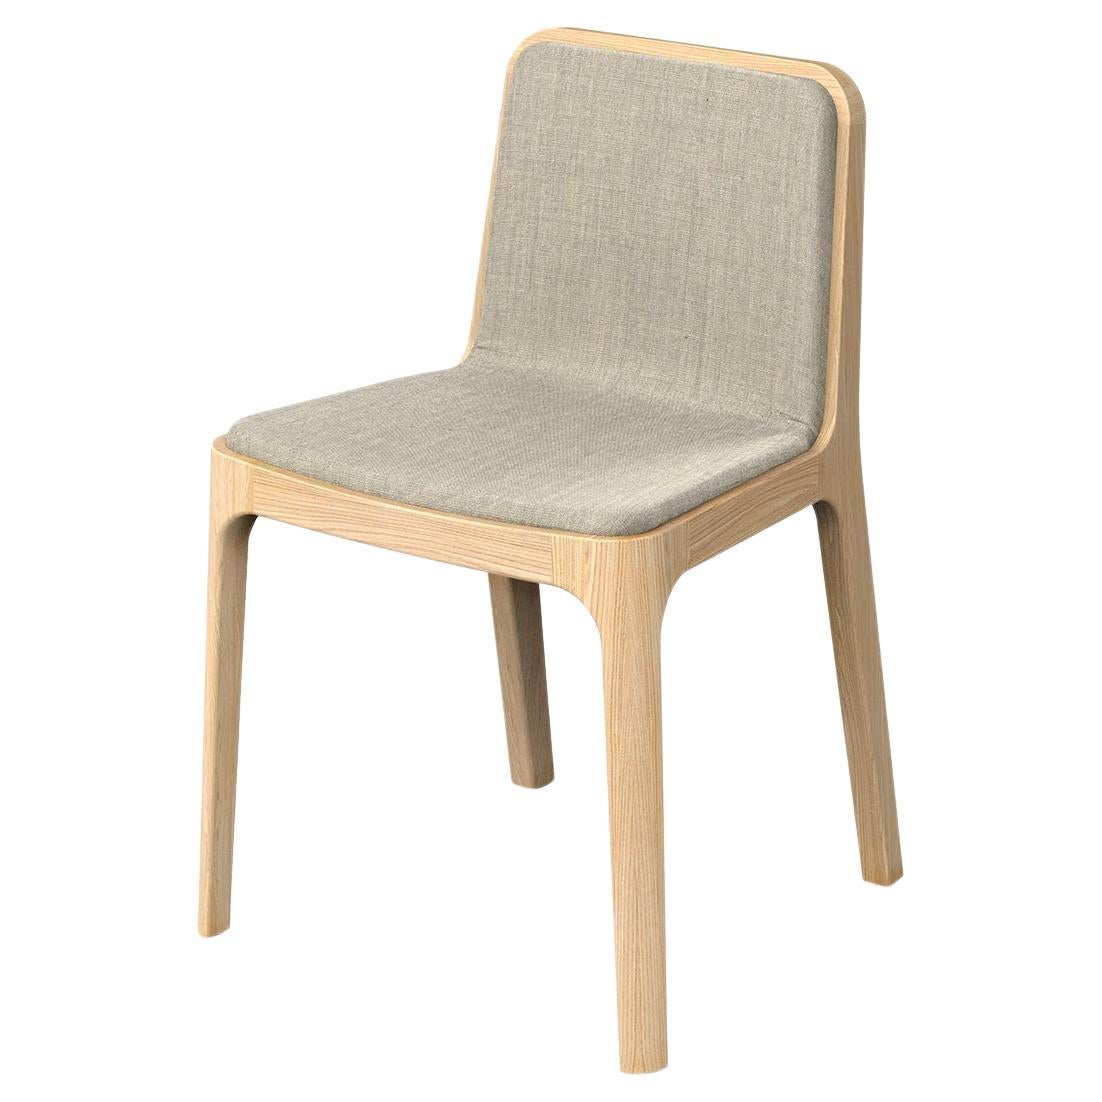 Minimalist Modern Chair in Ash Wood Fabric Upholstery For Sale